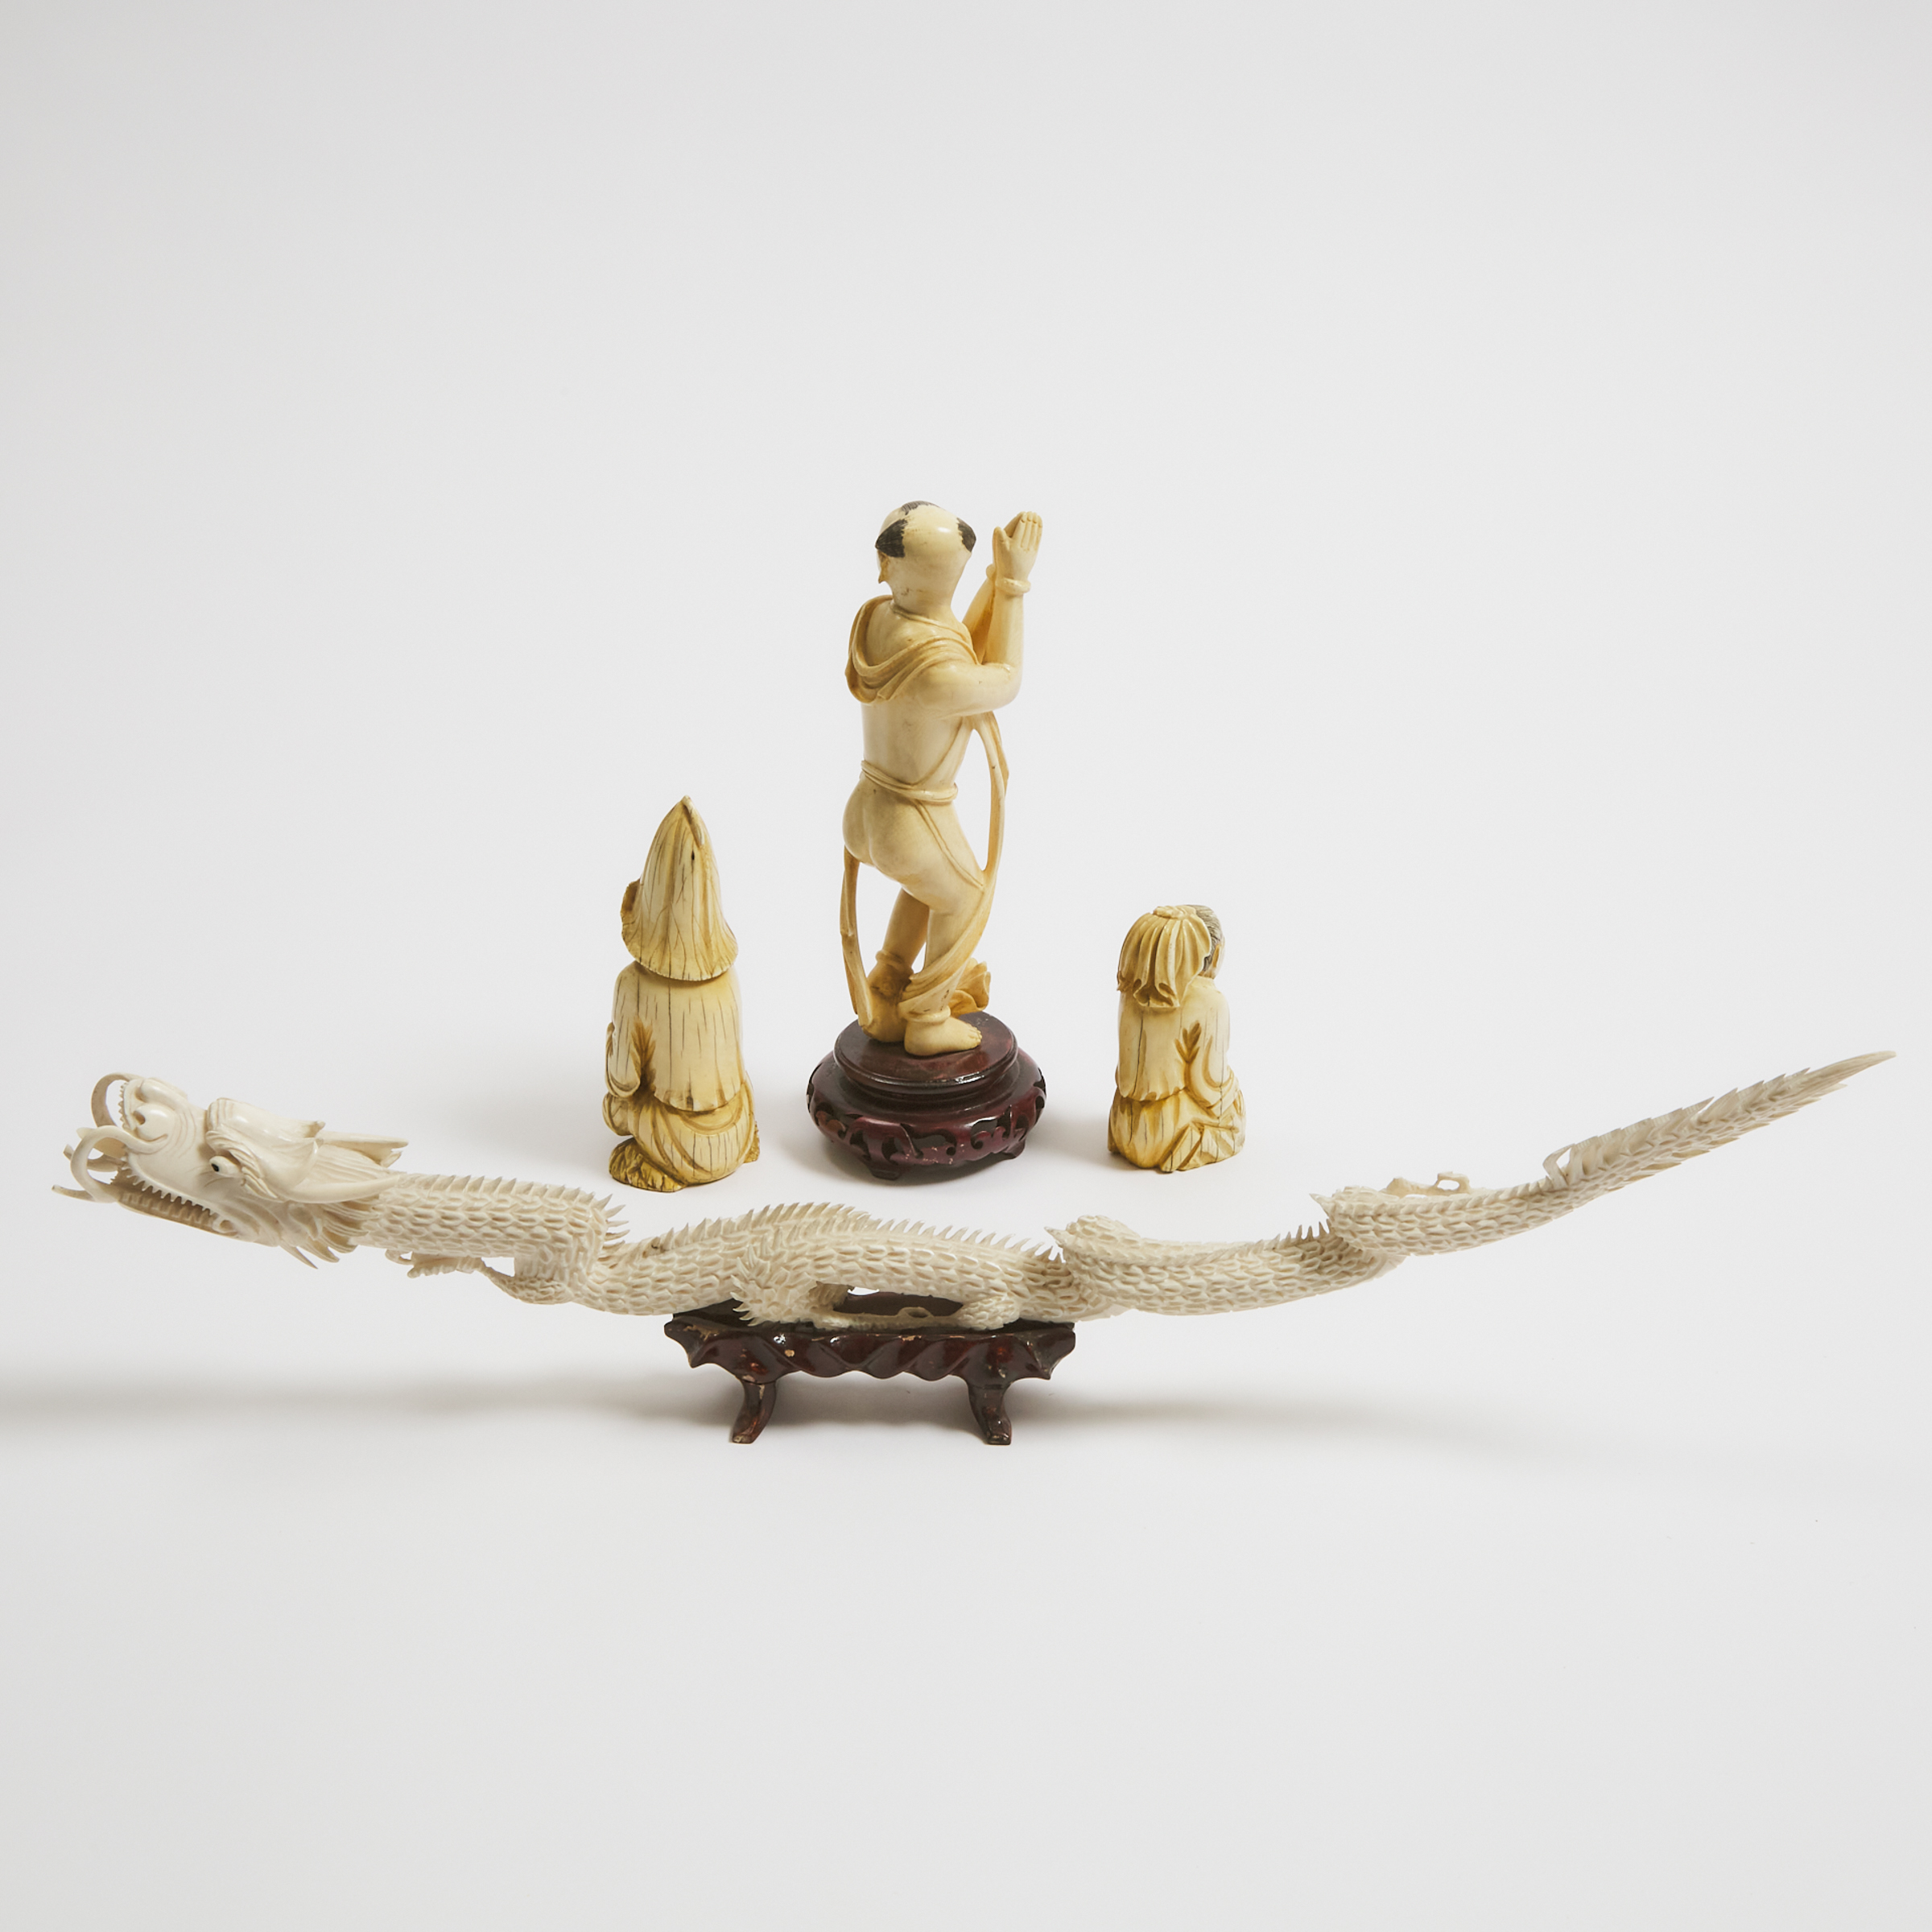 A Group of Four Ivory Carvings, 19th/20th Century